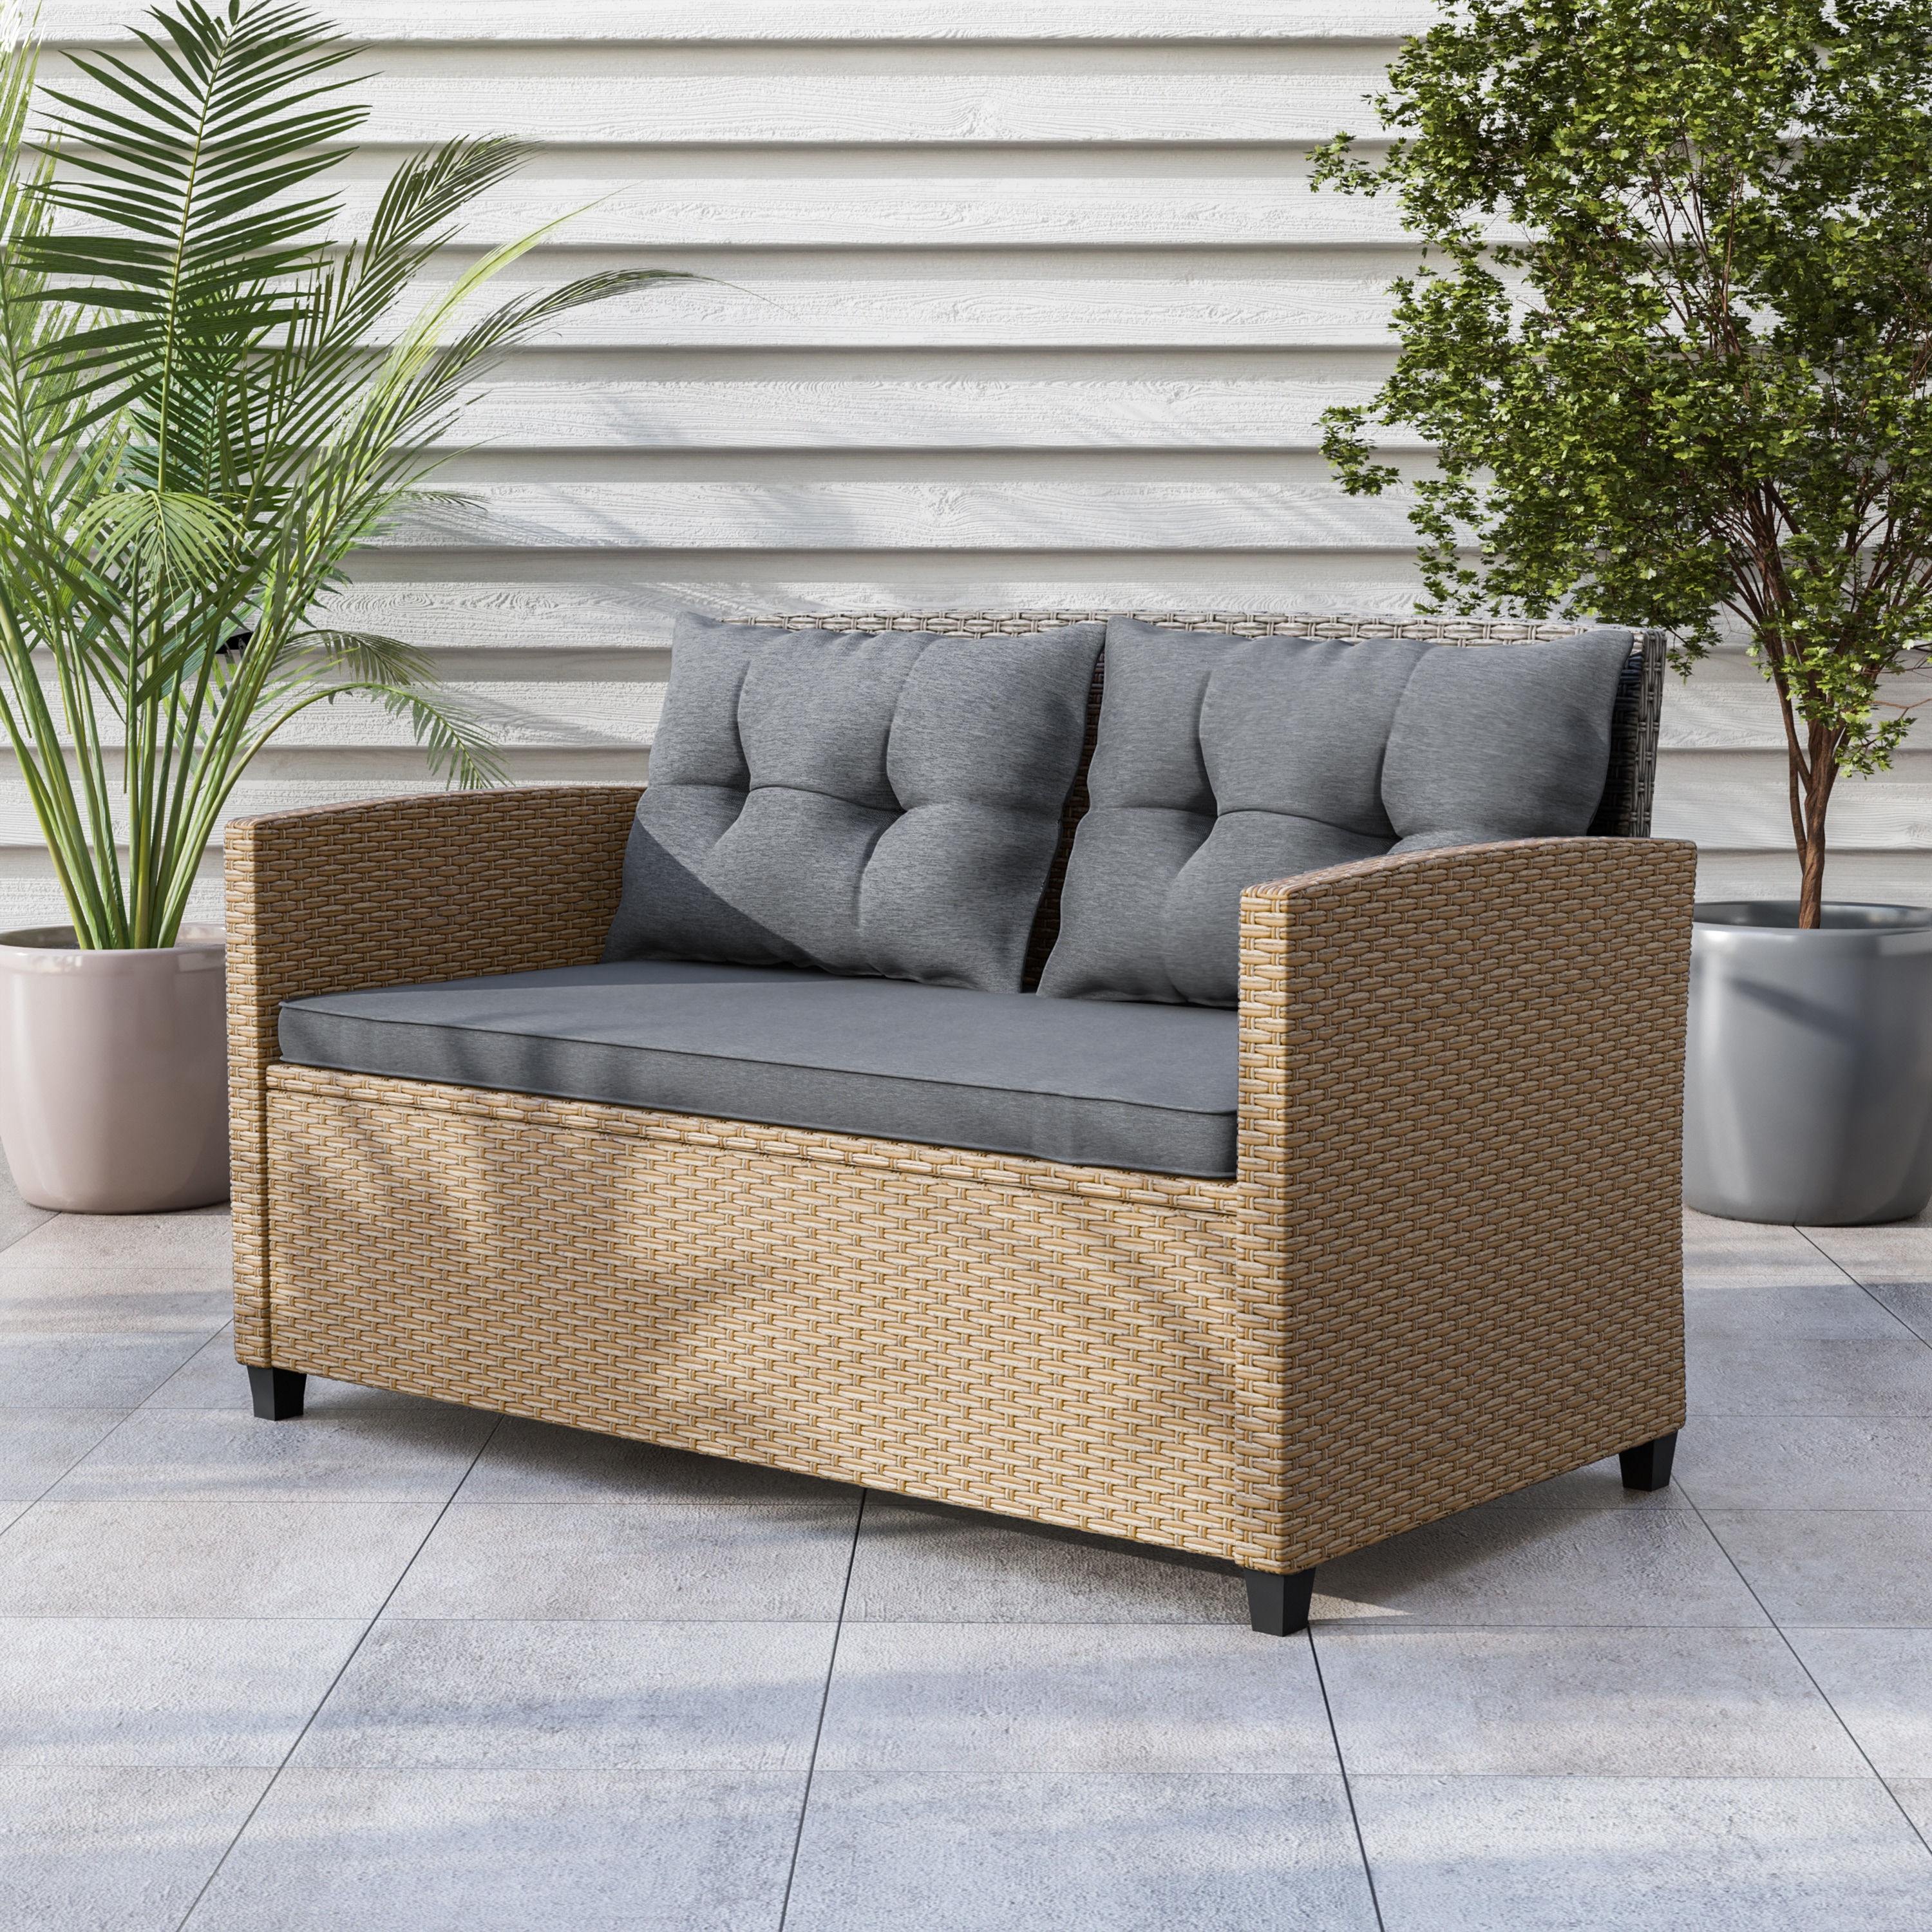 Alaya Transitional Compact Wicker Pillow Back Outdoor Loveseat By M&l Co